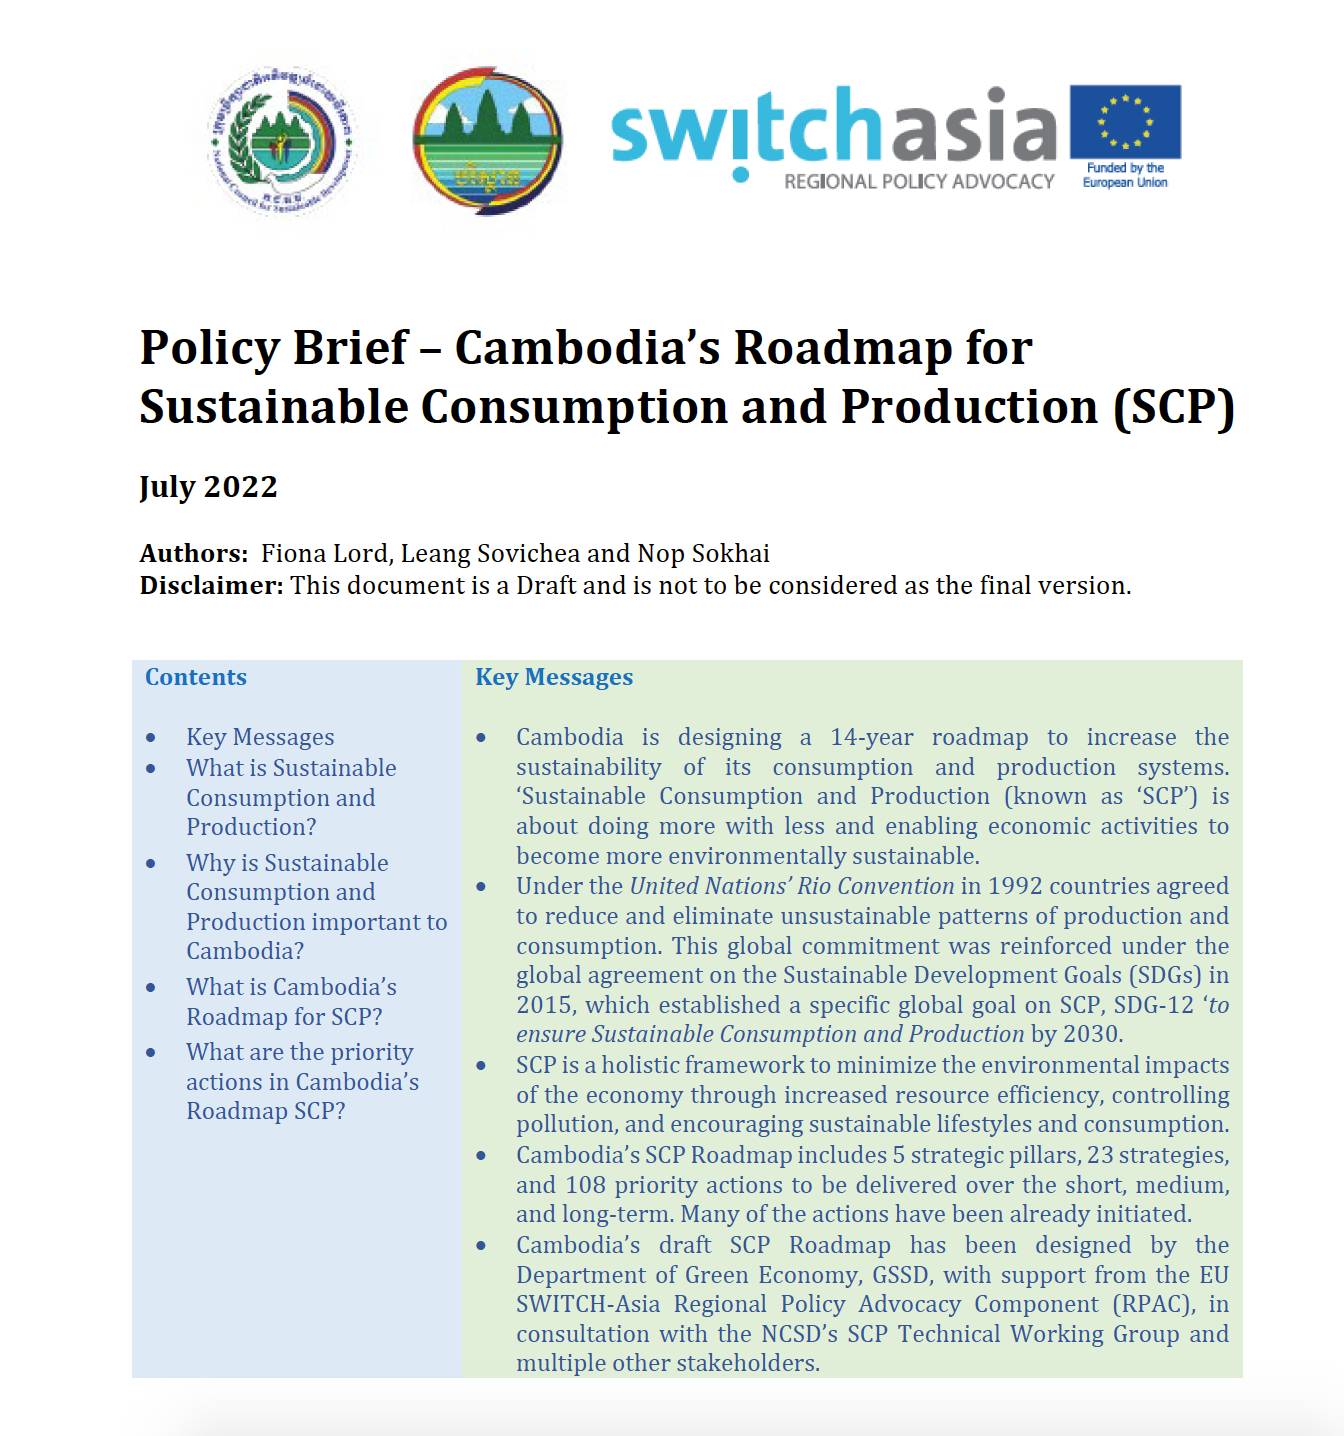 Policy Brief – Cambodia’s Roadmap for Sustainable Consumption and Production (SCP)